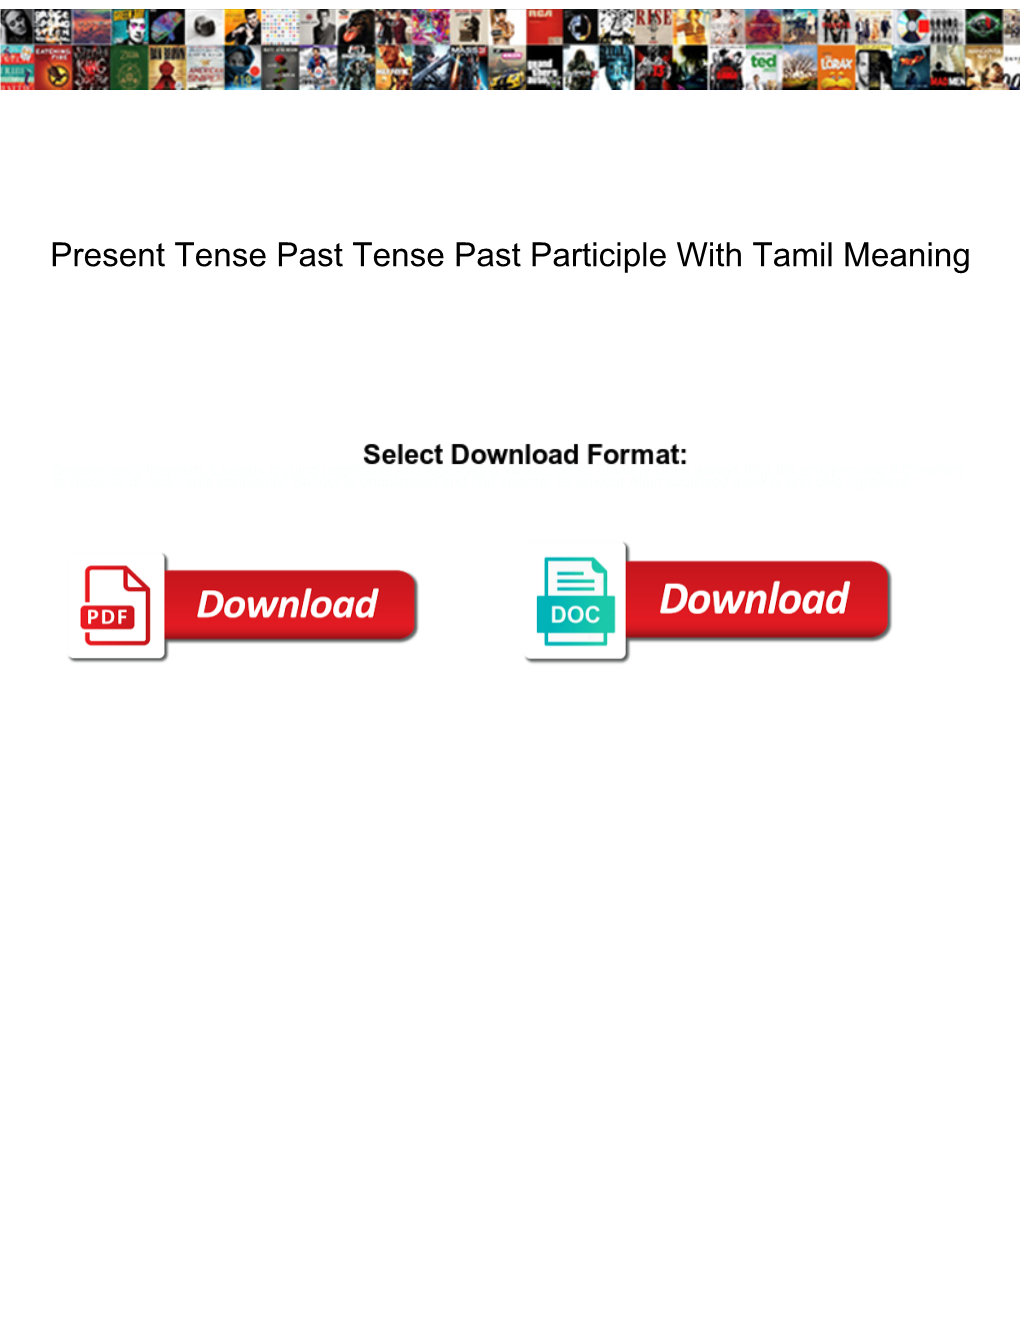 Present Tense Past Tense Past Participle with Tamil Meaning